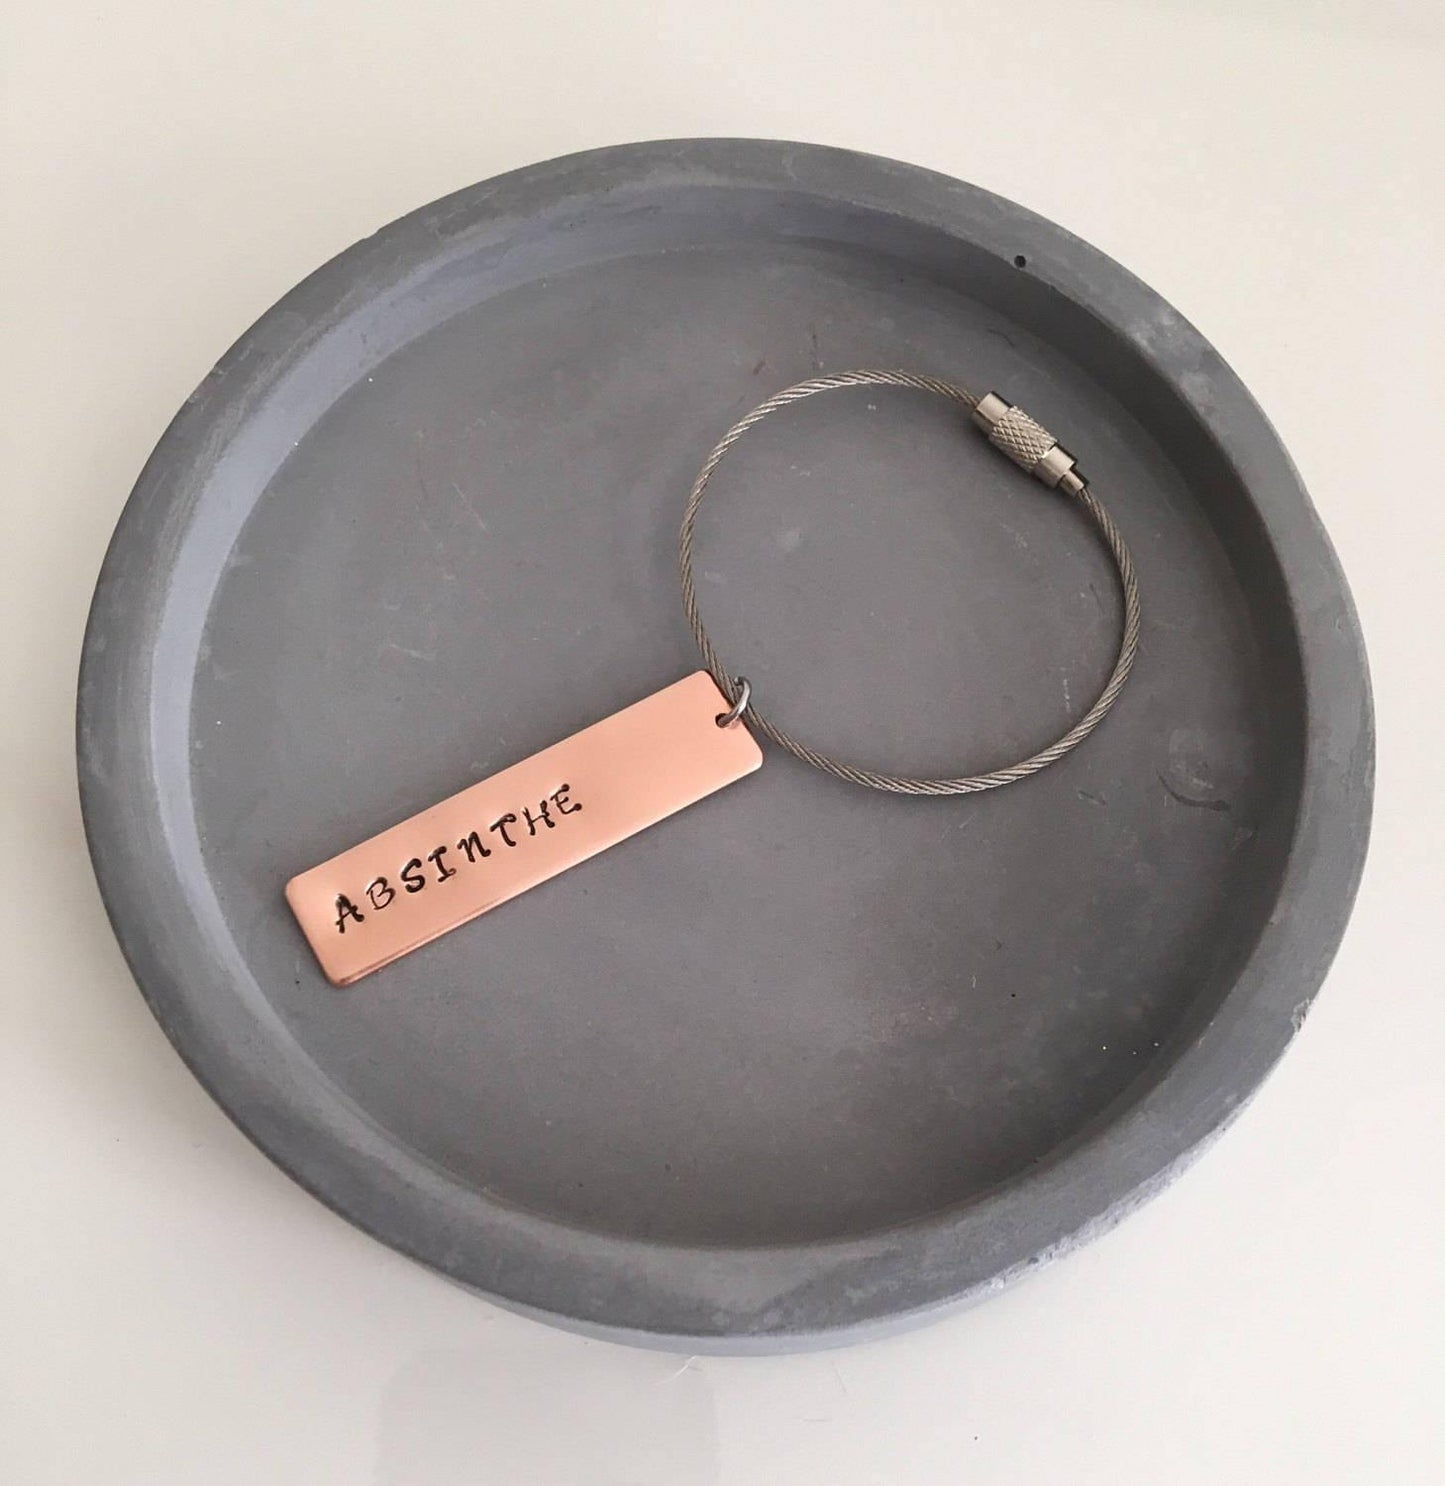 Copper Keyring, Father's Day, Father's Day Gift, Copper Keychain, Personalise Keyring, Copper Gift, Stamped Keyring, choose your own wording - The Little Stamping Co.